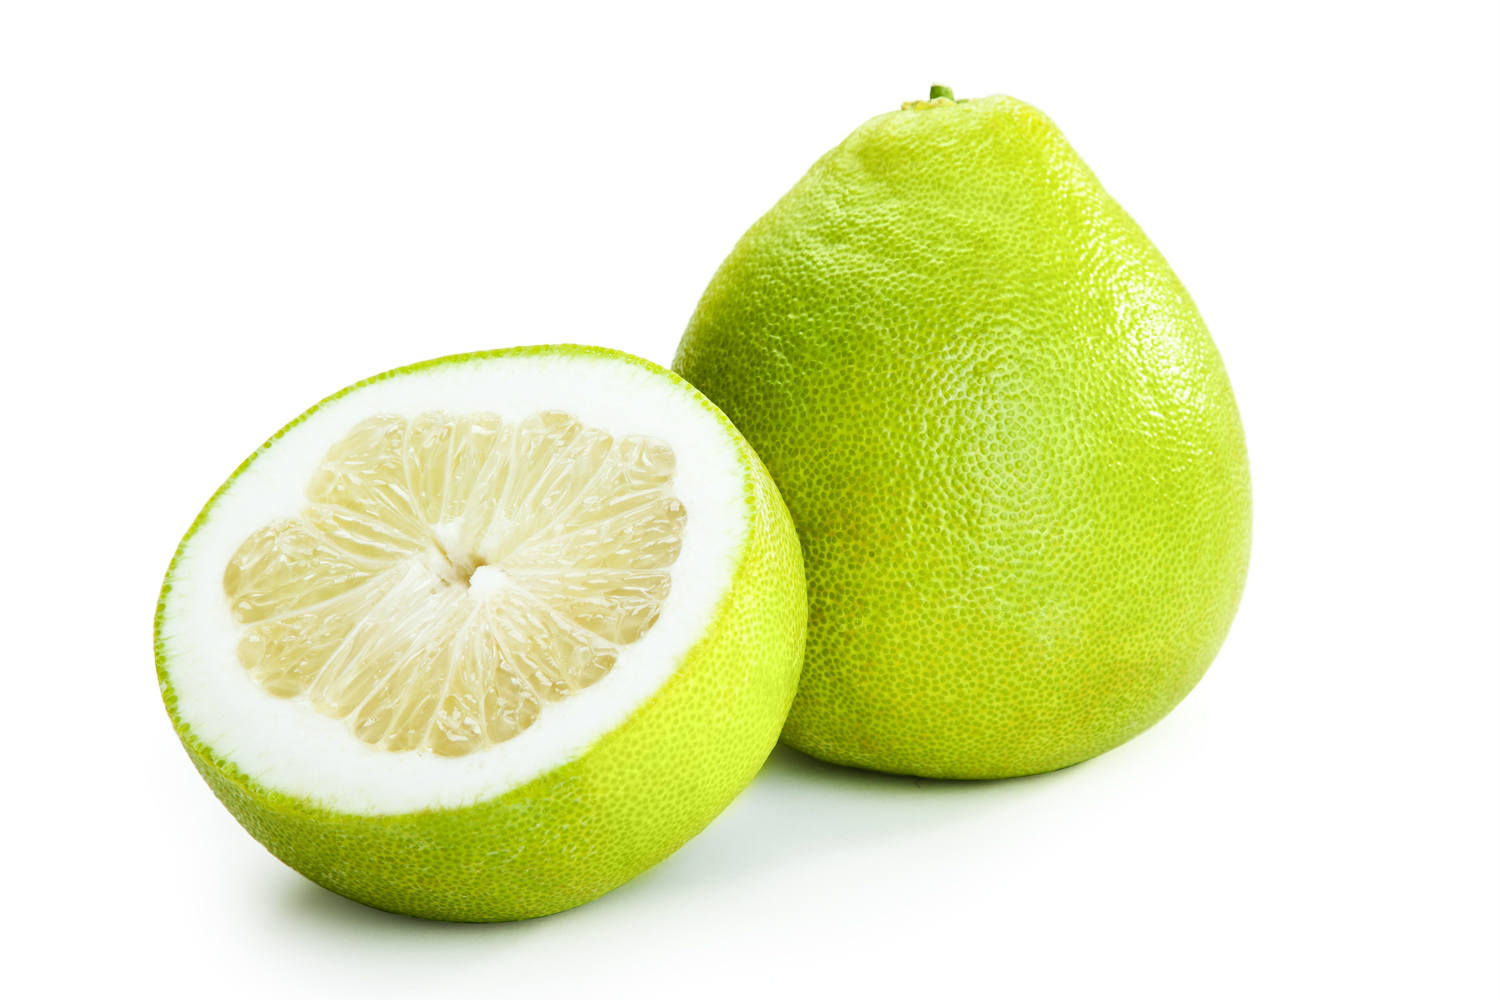 pomelo-lord-of-the-citrus-fruits-best-herbal-health